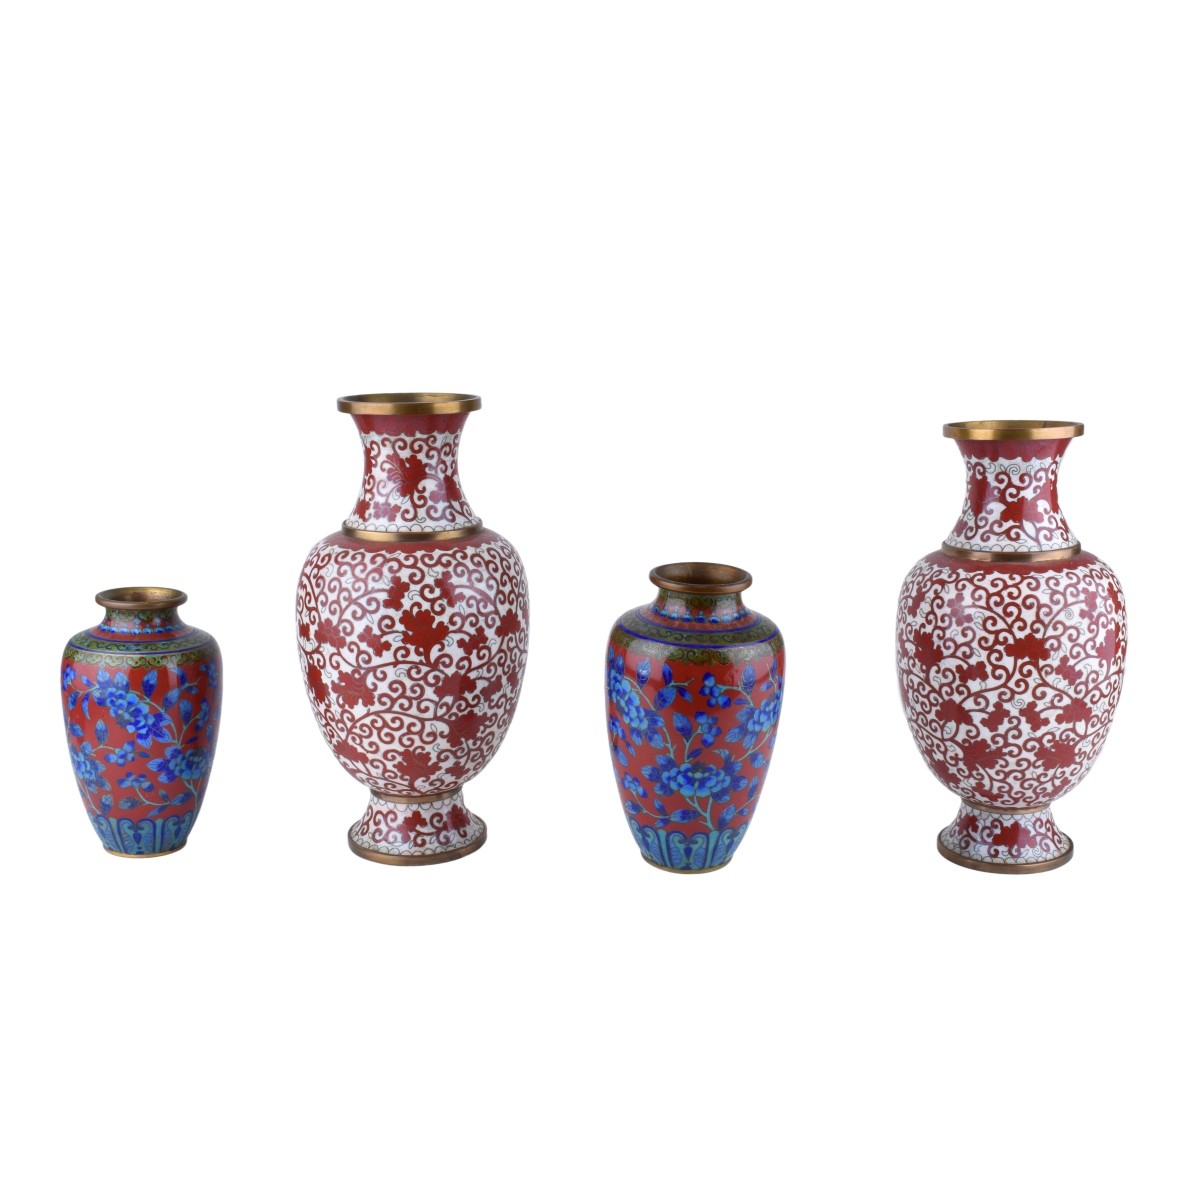 Two (2) Pairs of Chinese Cloisonne Enamel Vases